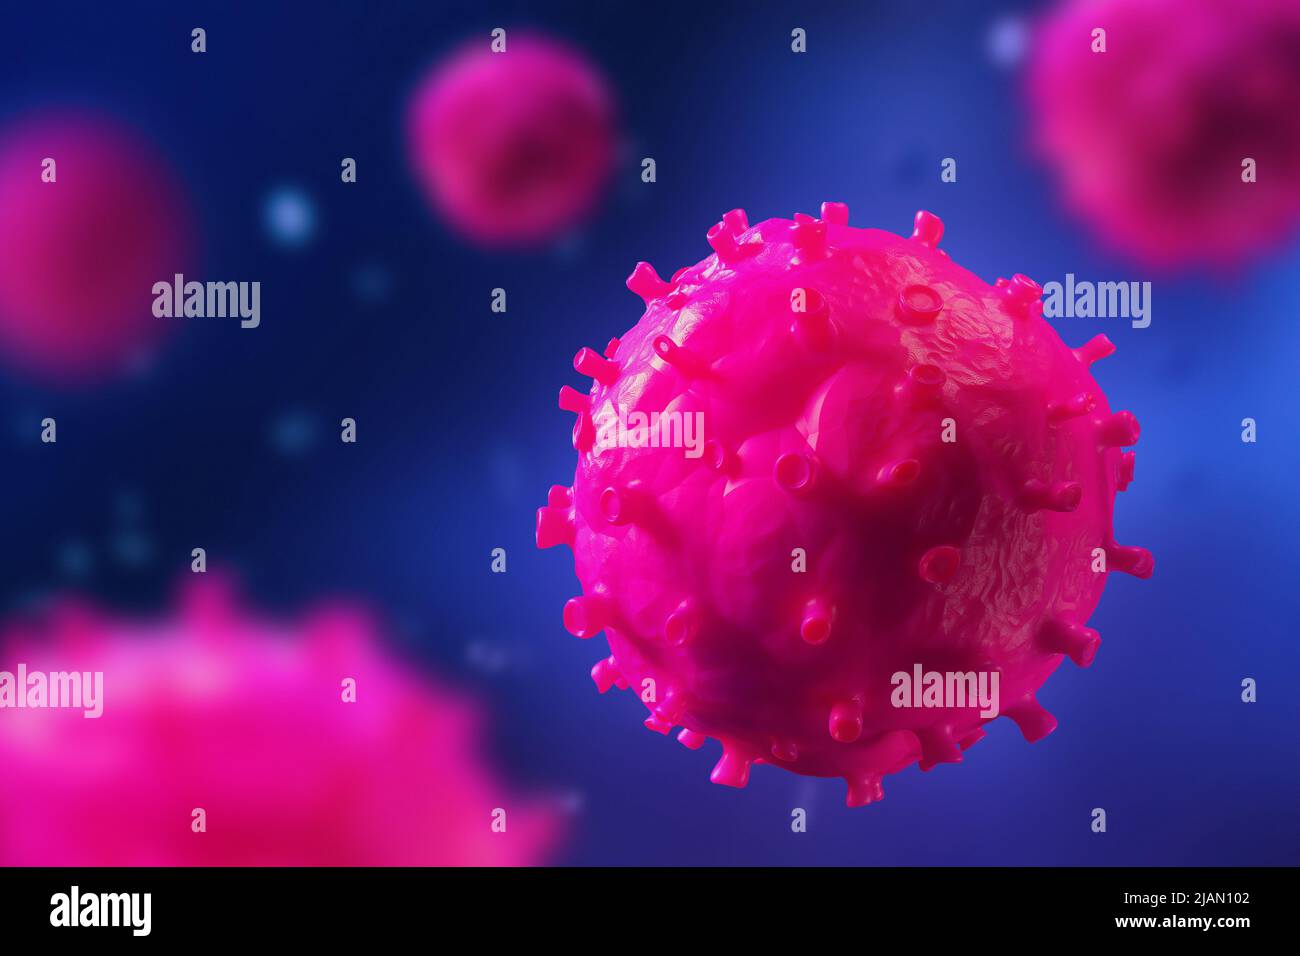 Viruses and microorganisms. 3D illustration in high resolution. Medical research in the field of microbiology Stock Photo